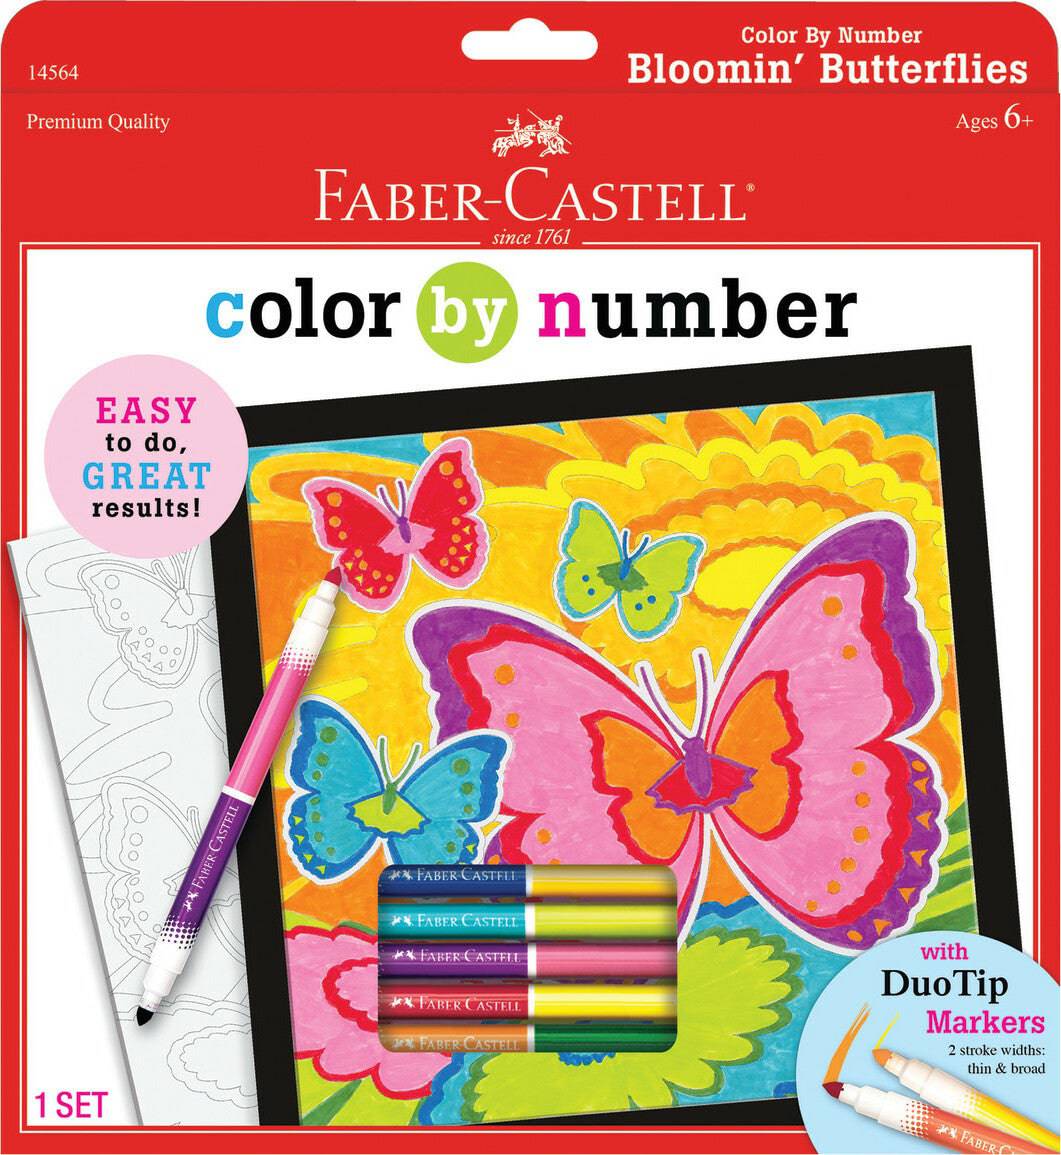 Color By Number Butterflies - A Child's Delight